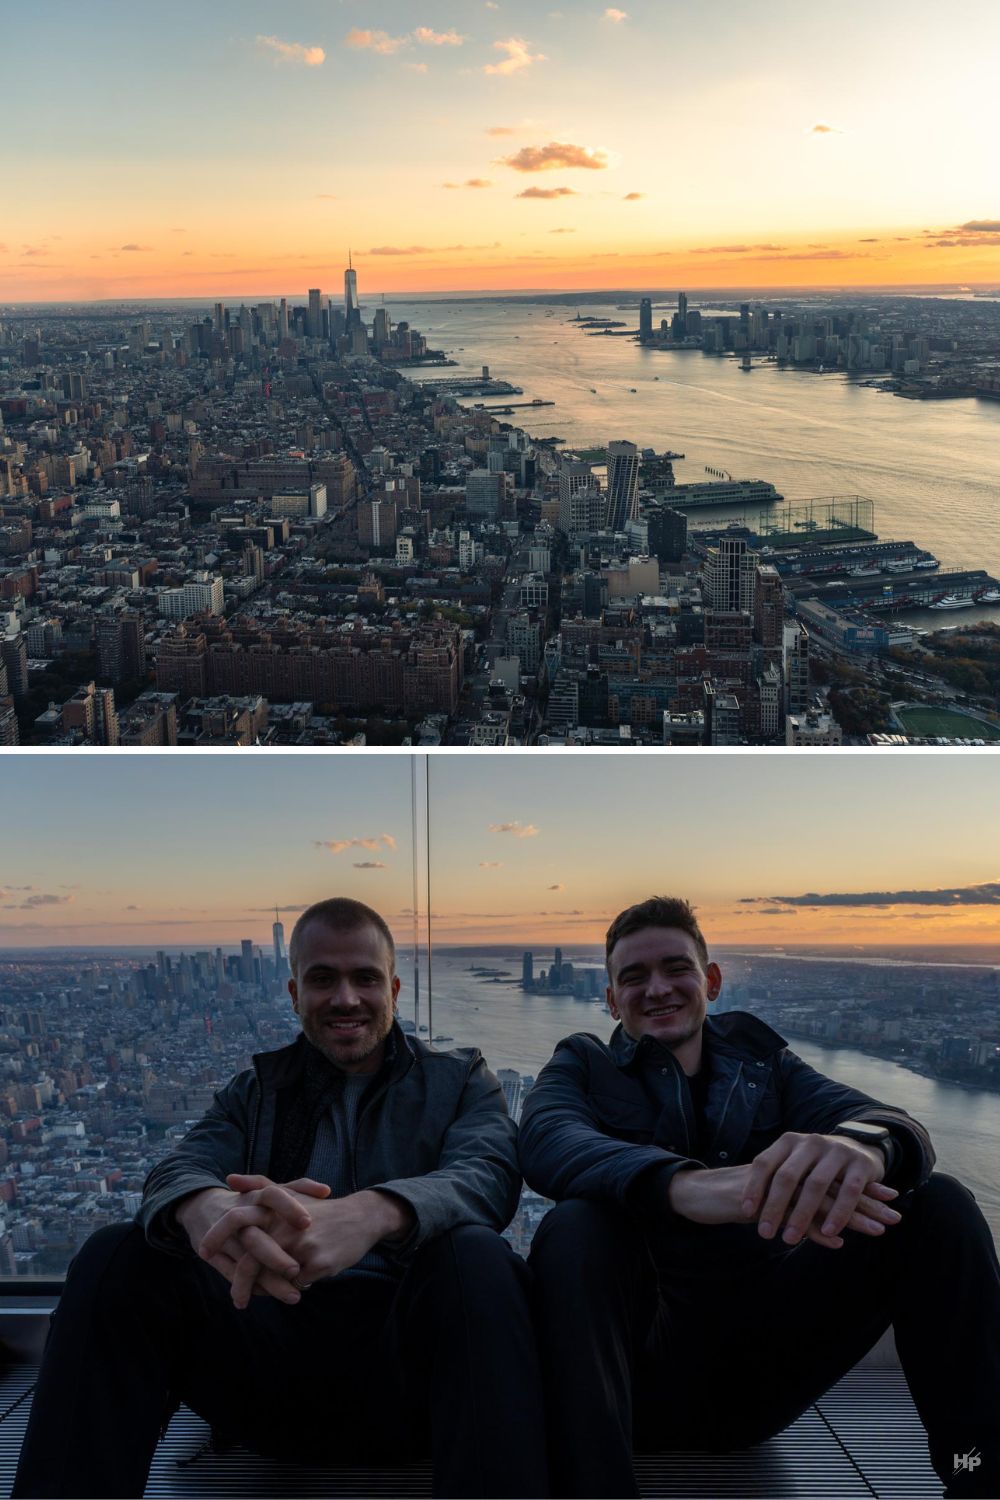 Edge Observation Deck NYC Sunset with friends